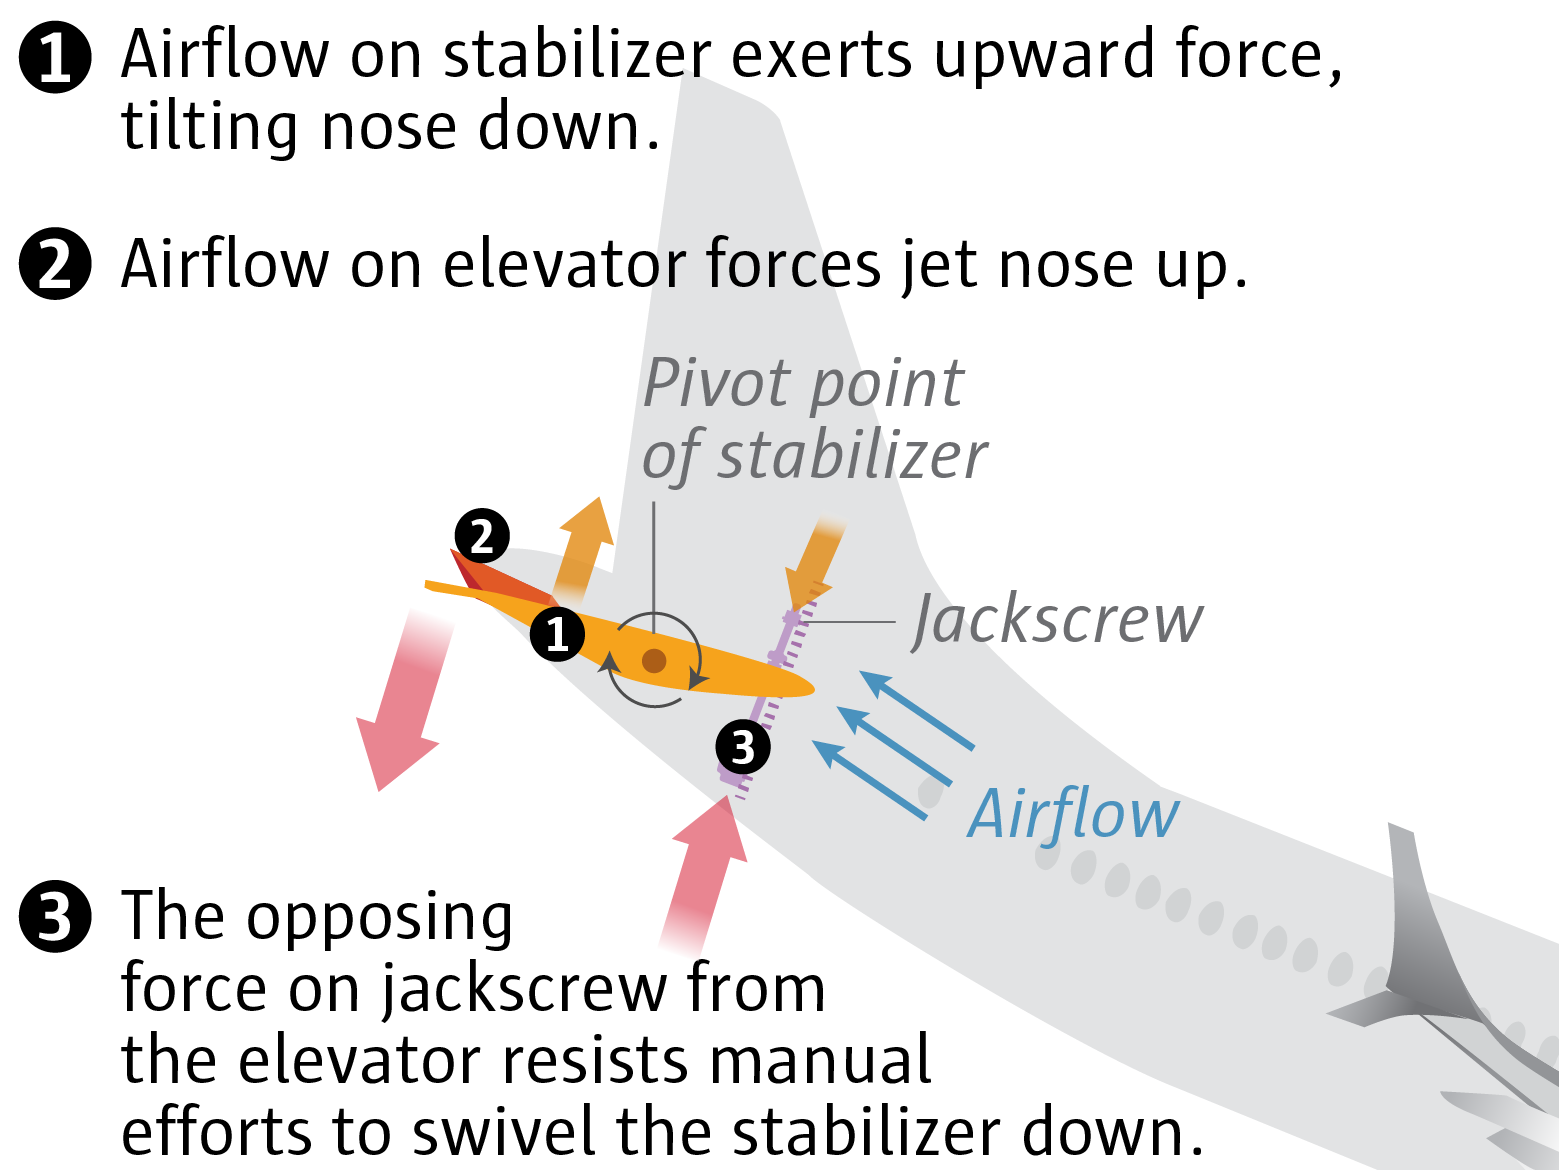 Diagram shows opposing forces on the tail end of the plane. Airflow on the horizontal stabilizer exerts upward force tilting the nose down. Airflow on the elevator forces the jet nose up. The opposing force on the jackscrew, from the elevator, resists manual efforts to swivel the stabilizer down.